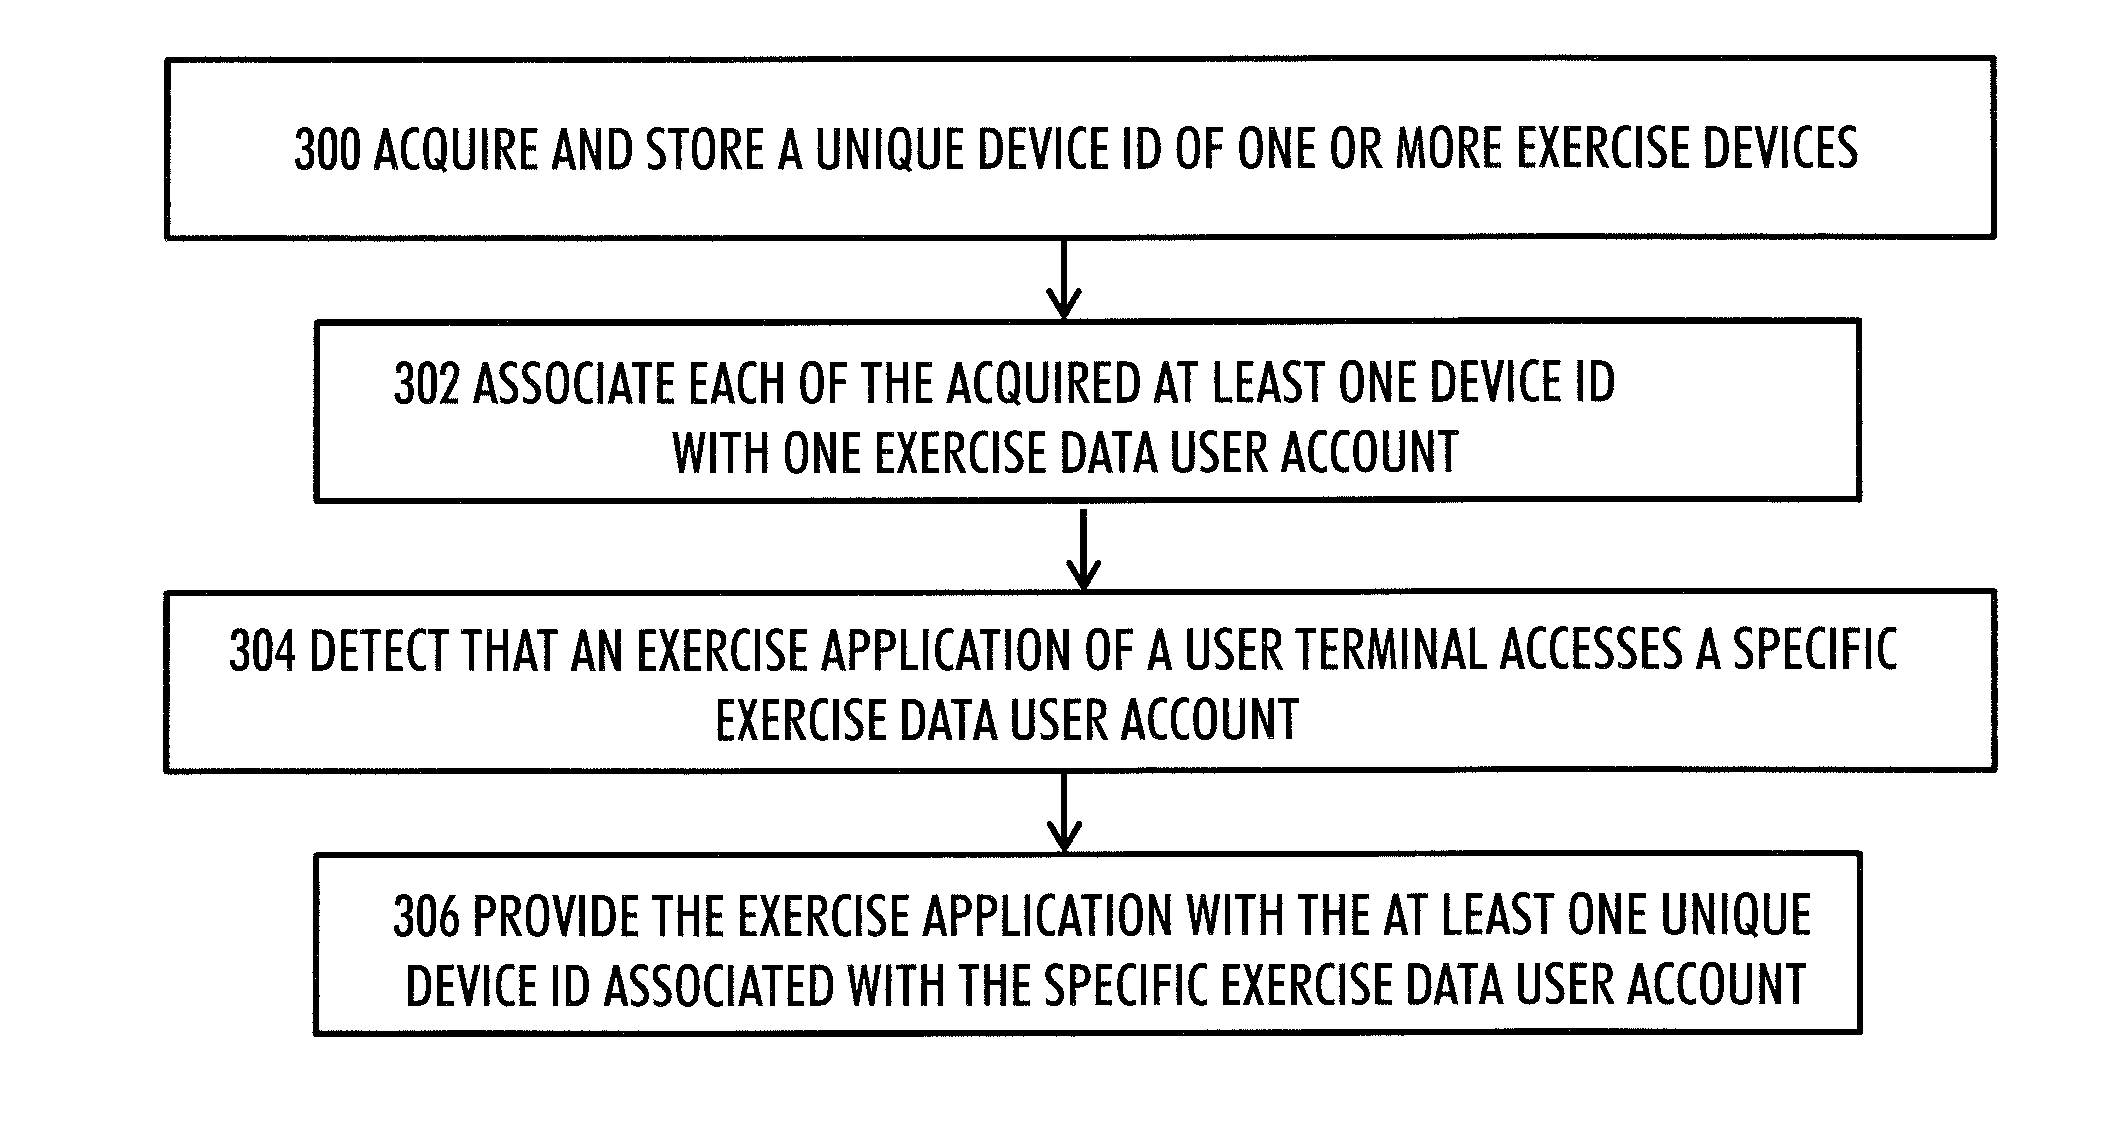 Pairing of devices